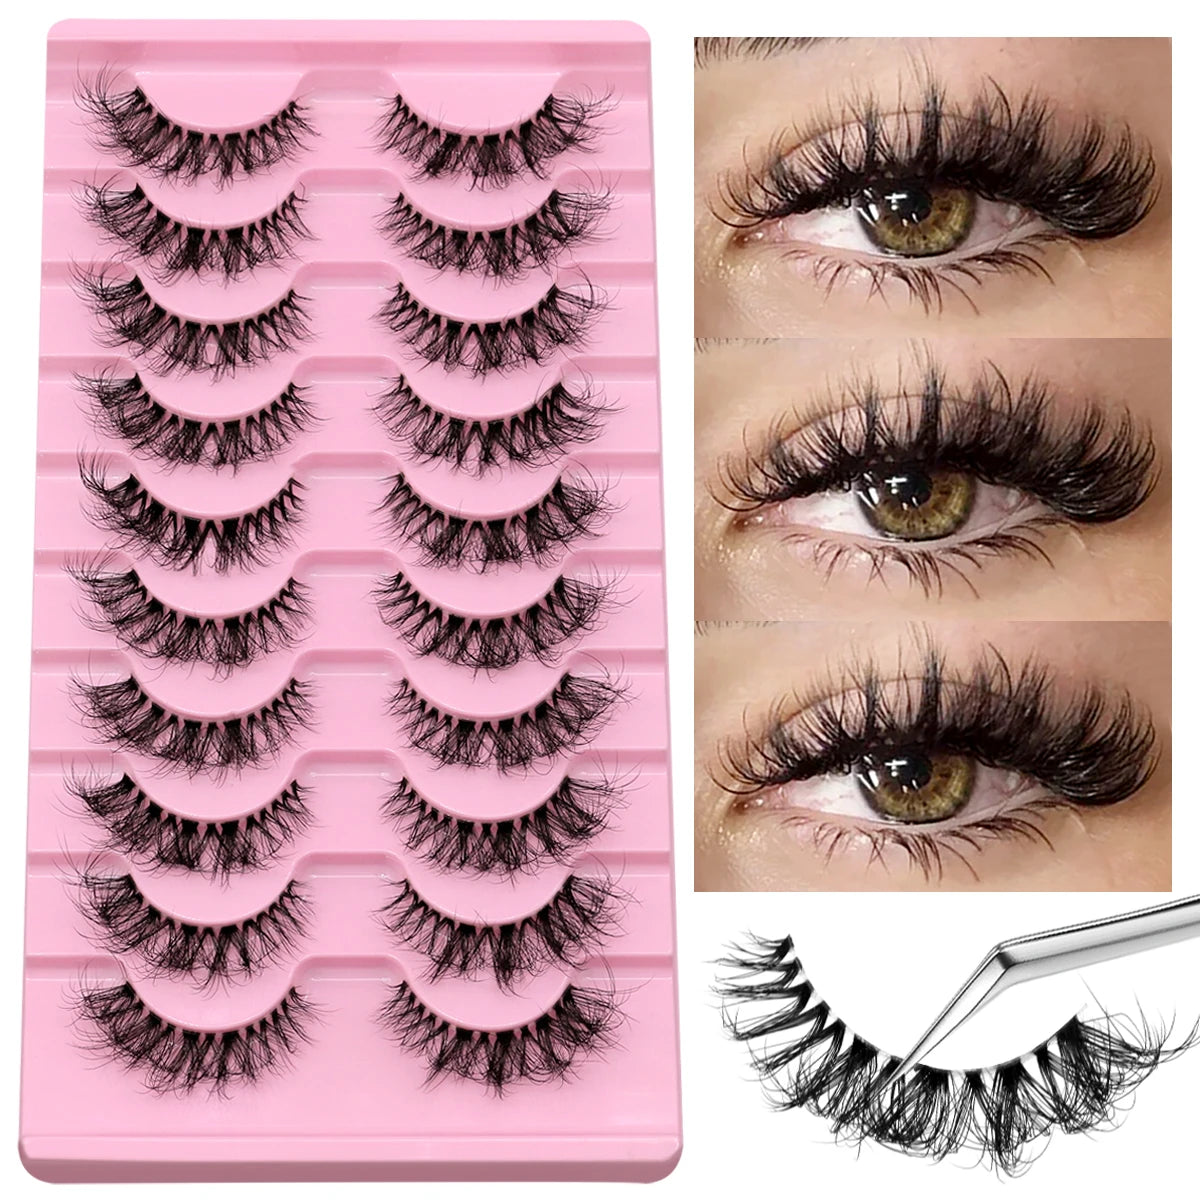 GROINNEYA 5/10 pairs Mink Eyelashes Invisible Band Natural False Eyelashes Cross Cluster Fairy 3D Faux Mink Lashes Extension